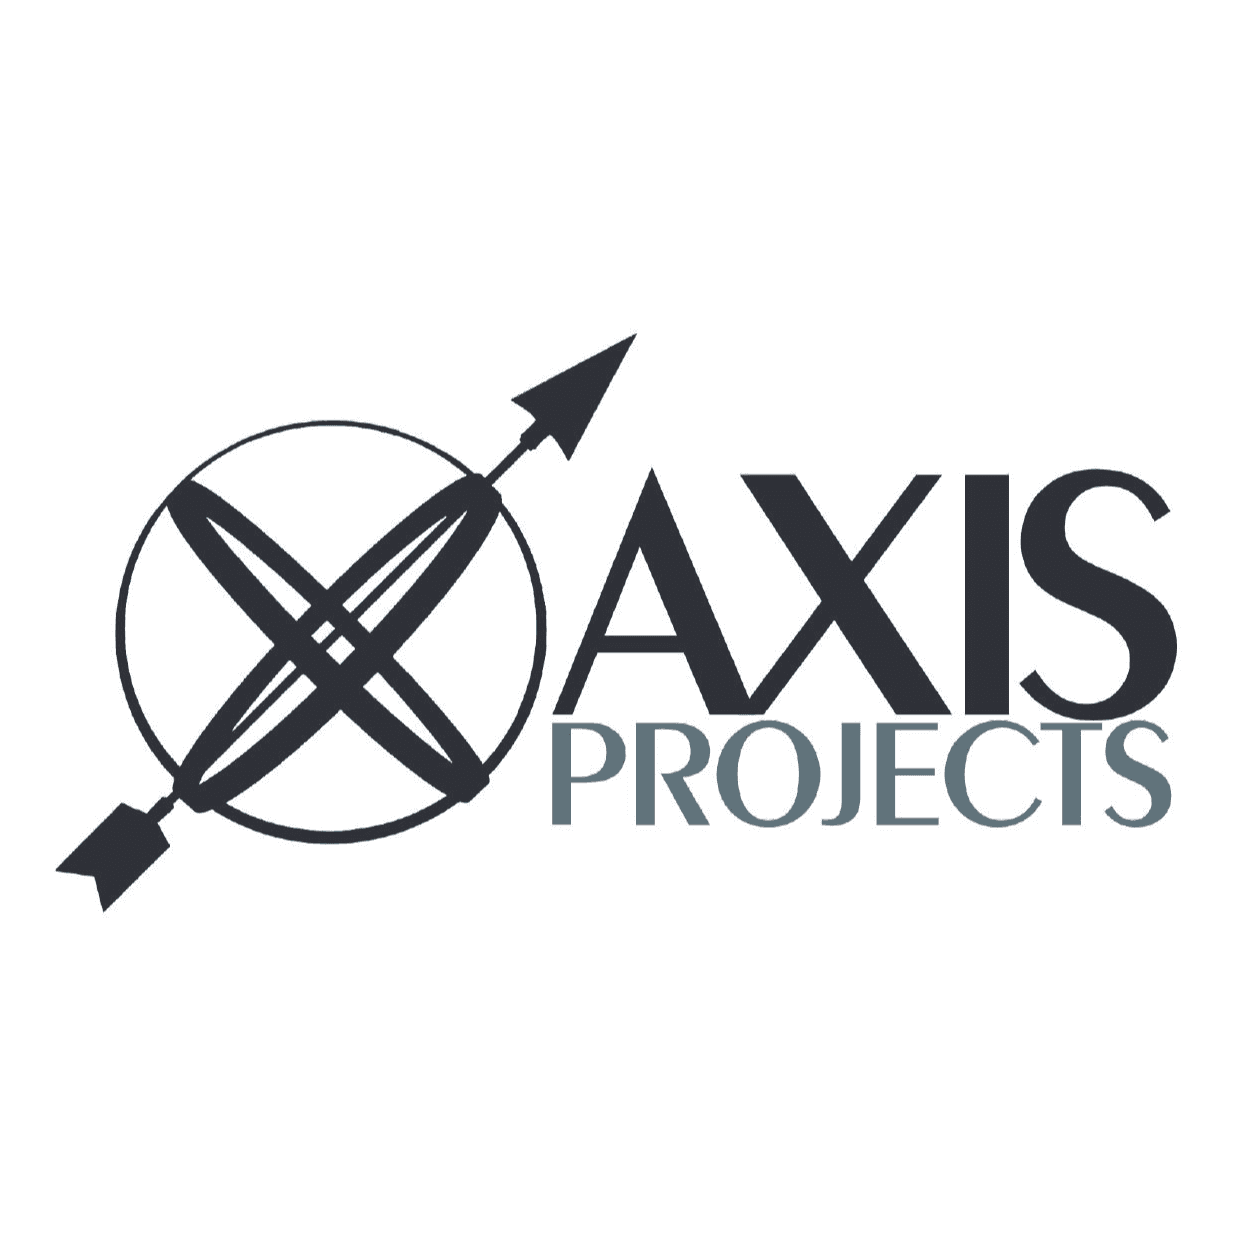 <p>Axis Projects</p> logo